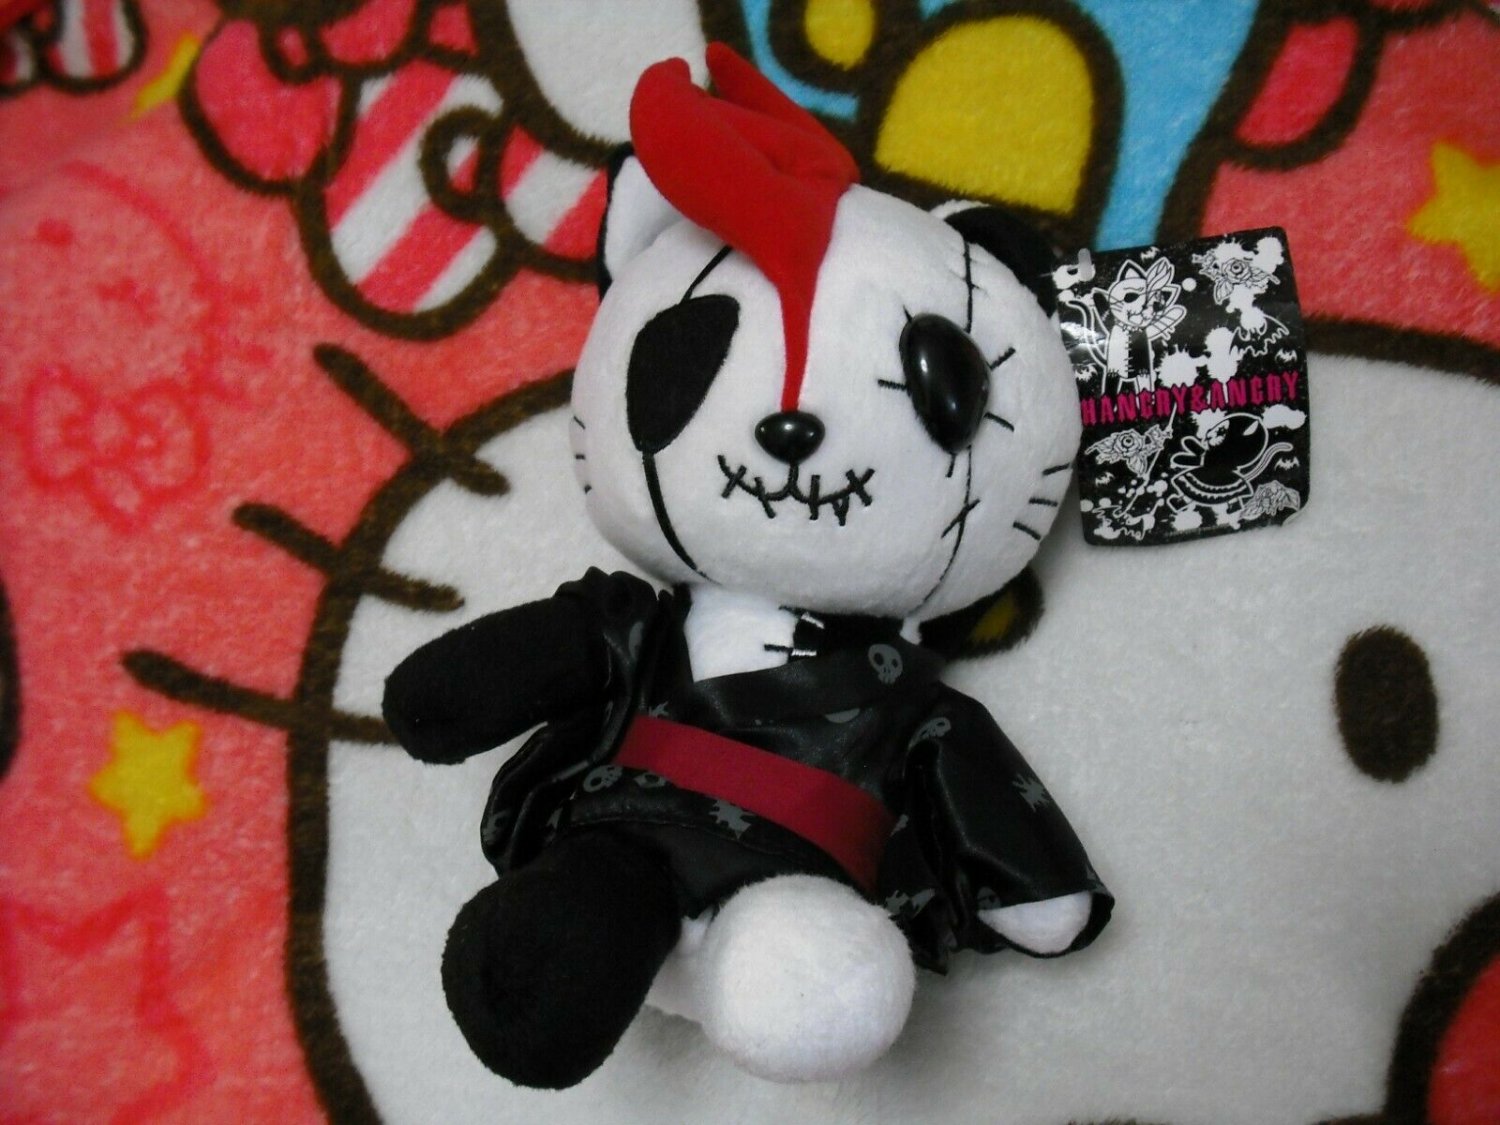 Hangry & Angry Gothic Punk Horror Cat with Kimono Plush TAITO